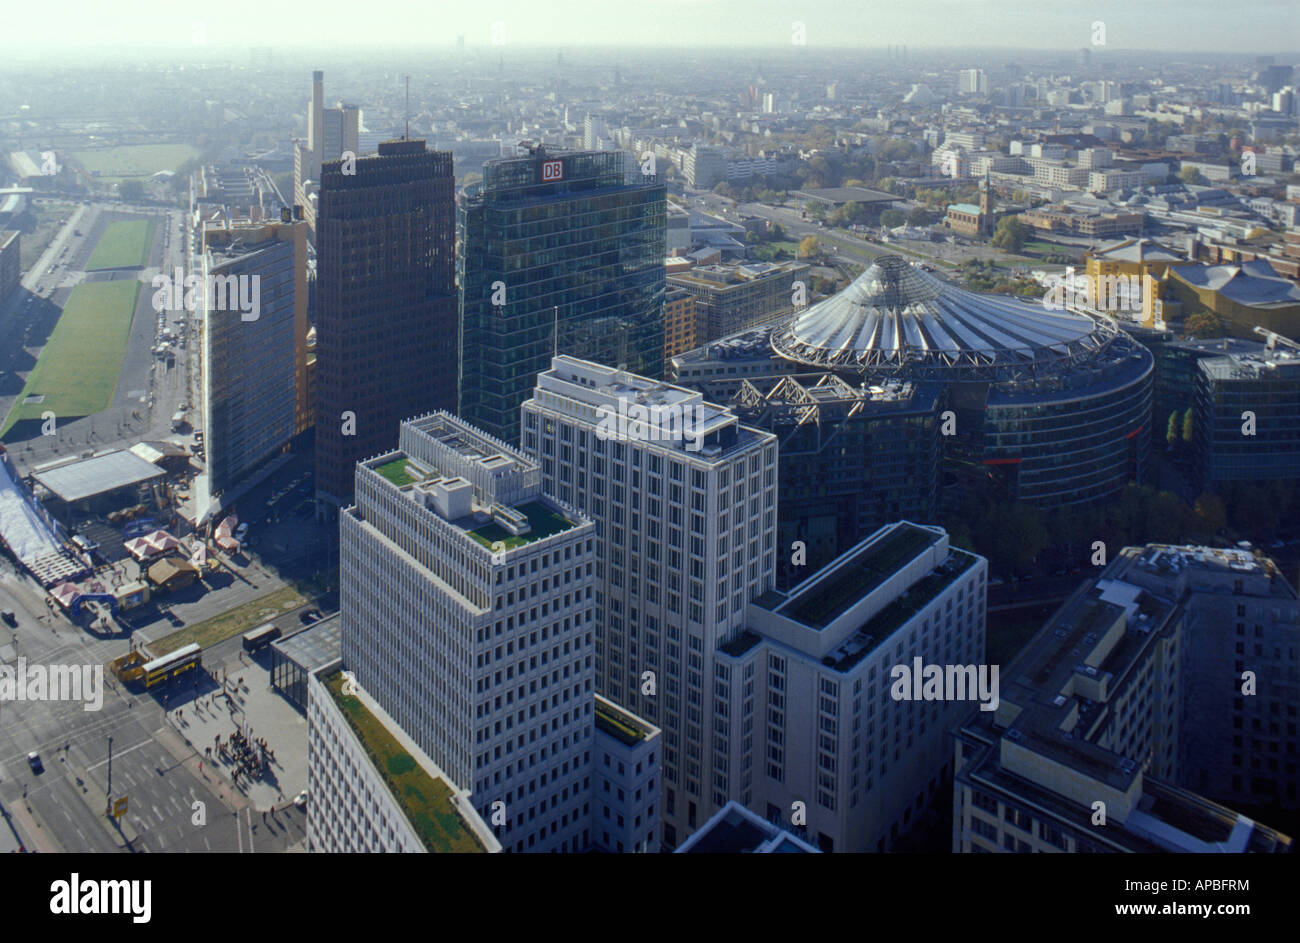 Berlin.Skyline. Potsdamer Platz with high-rise buildings with Sony Center, Ritz Carlton Hotel and Beisheim Center from above. Stock Photo